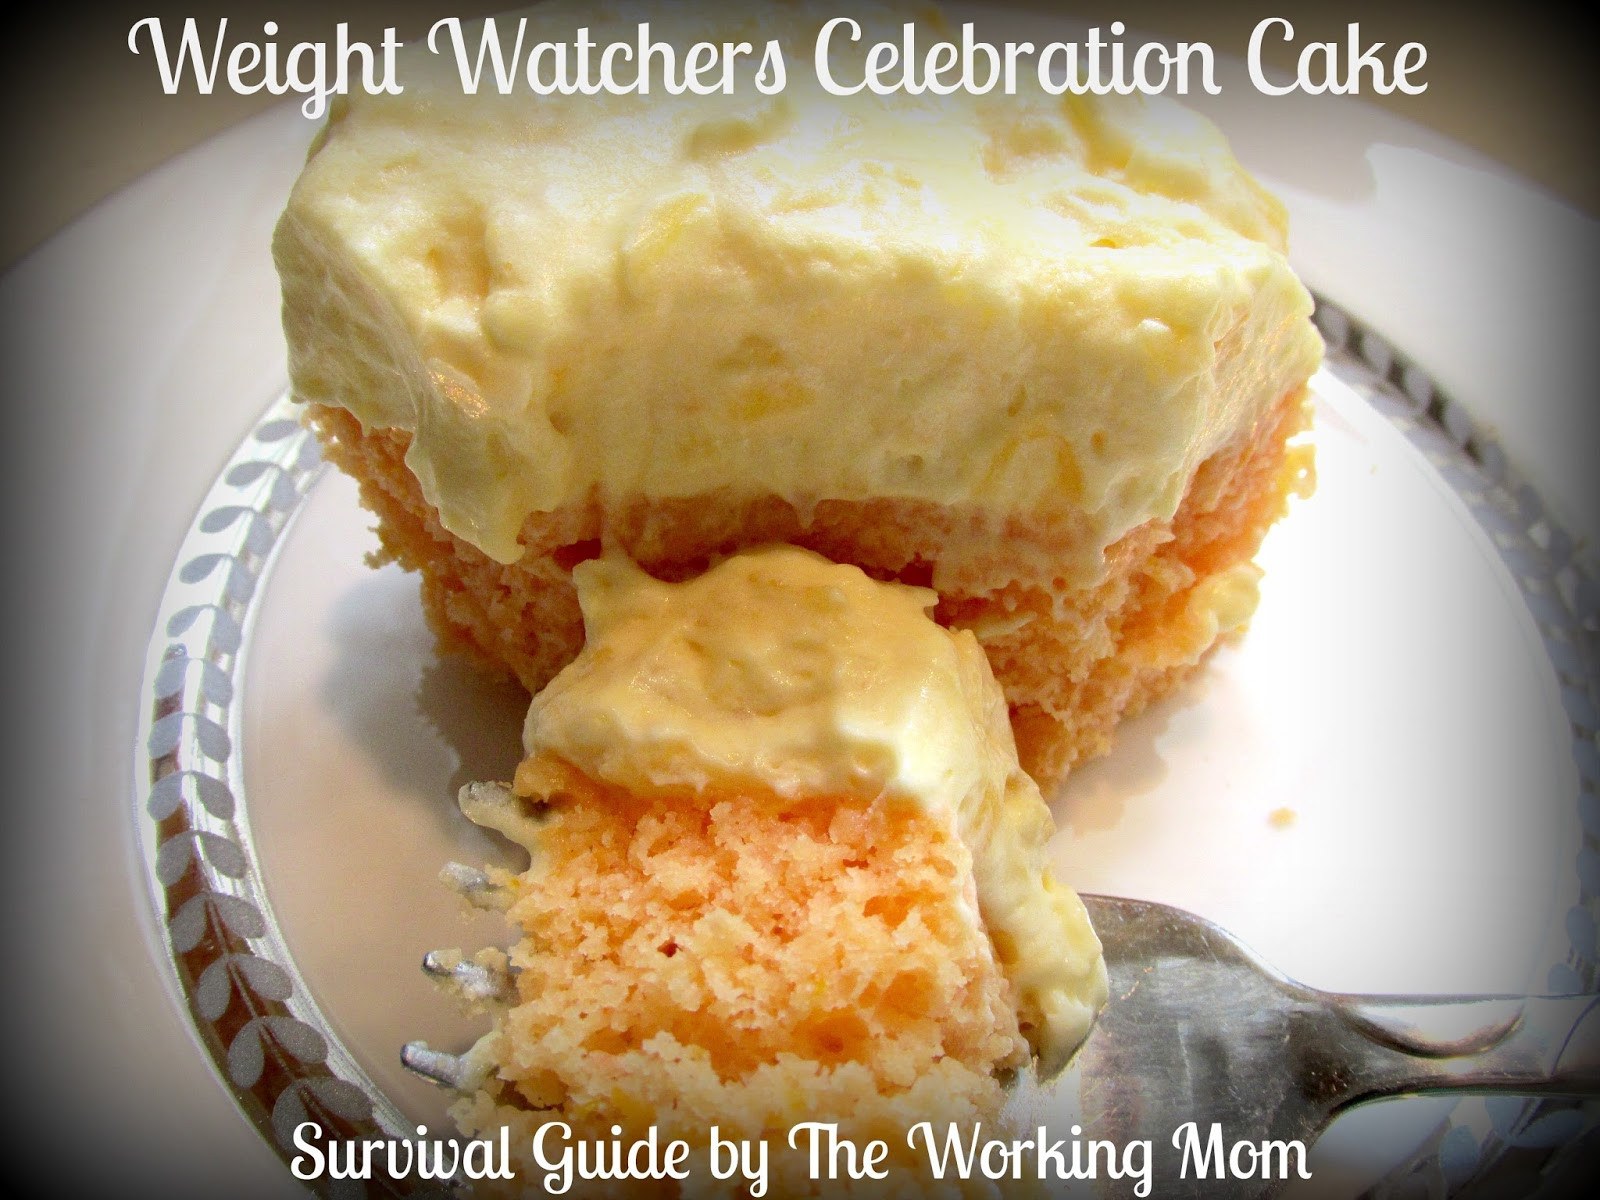 Weight Watchers Cake Recipes
 Survival Guide by The Working Mom Weight Watchers